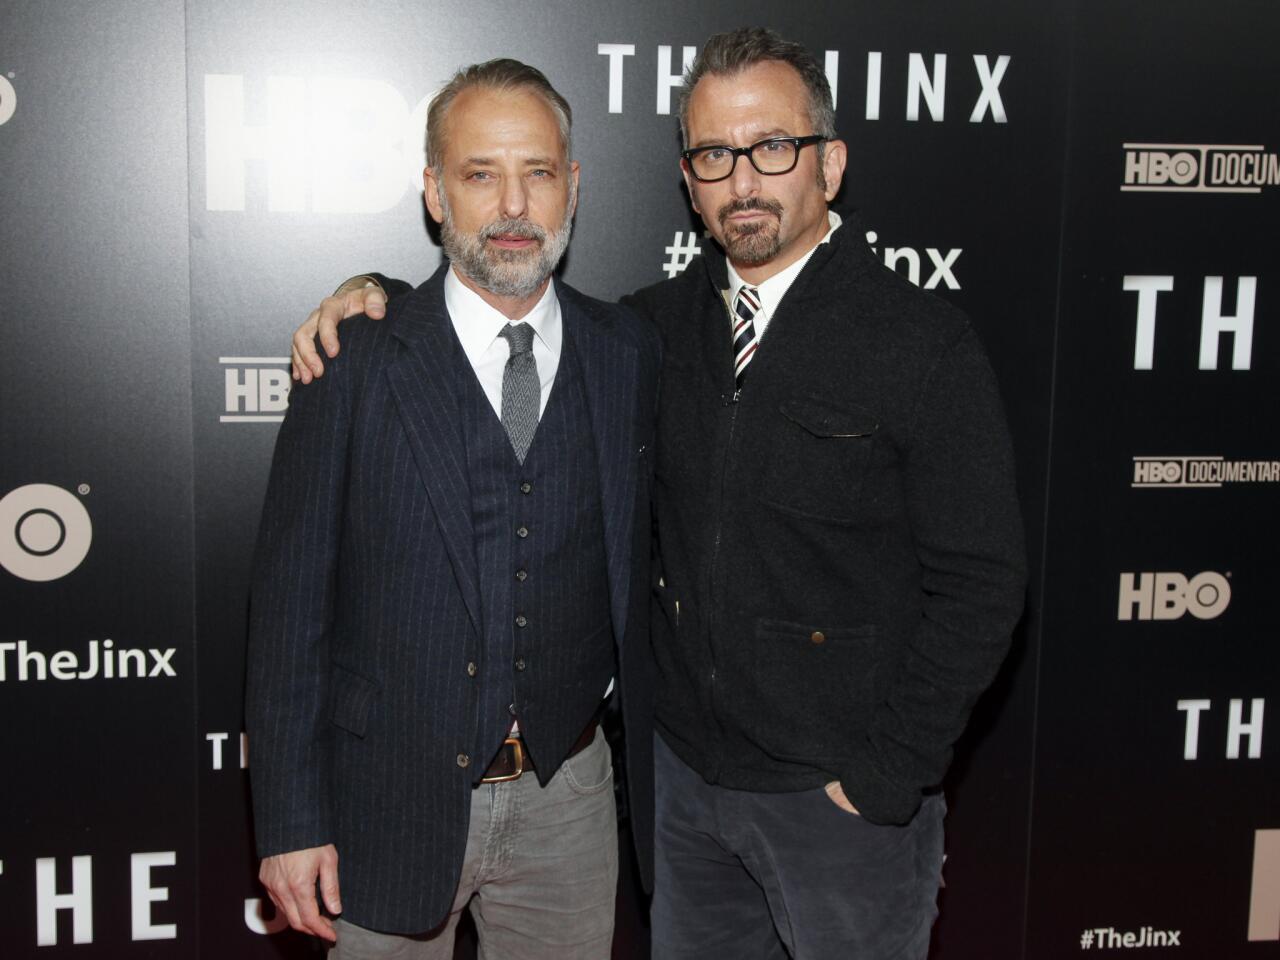 Marc Smerling, left, and Andrew Jarecki, attend the HBO Documentary Series premiere of "THE JINX: The Life and Deaths of Robert Durst" at the Time Warner Building on Wednesday, Jan. 28, 2015, in New York.